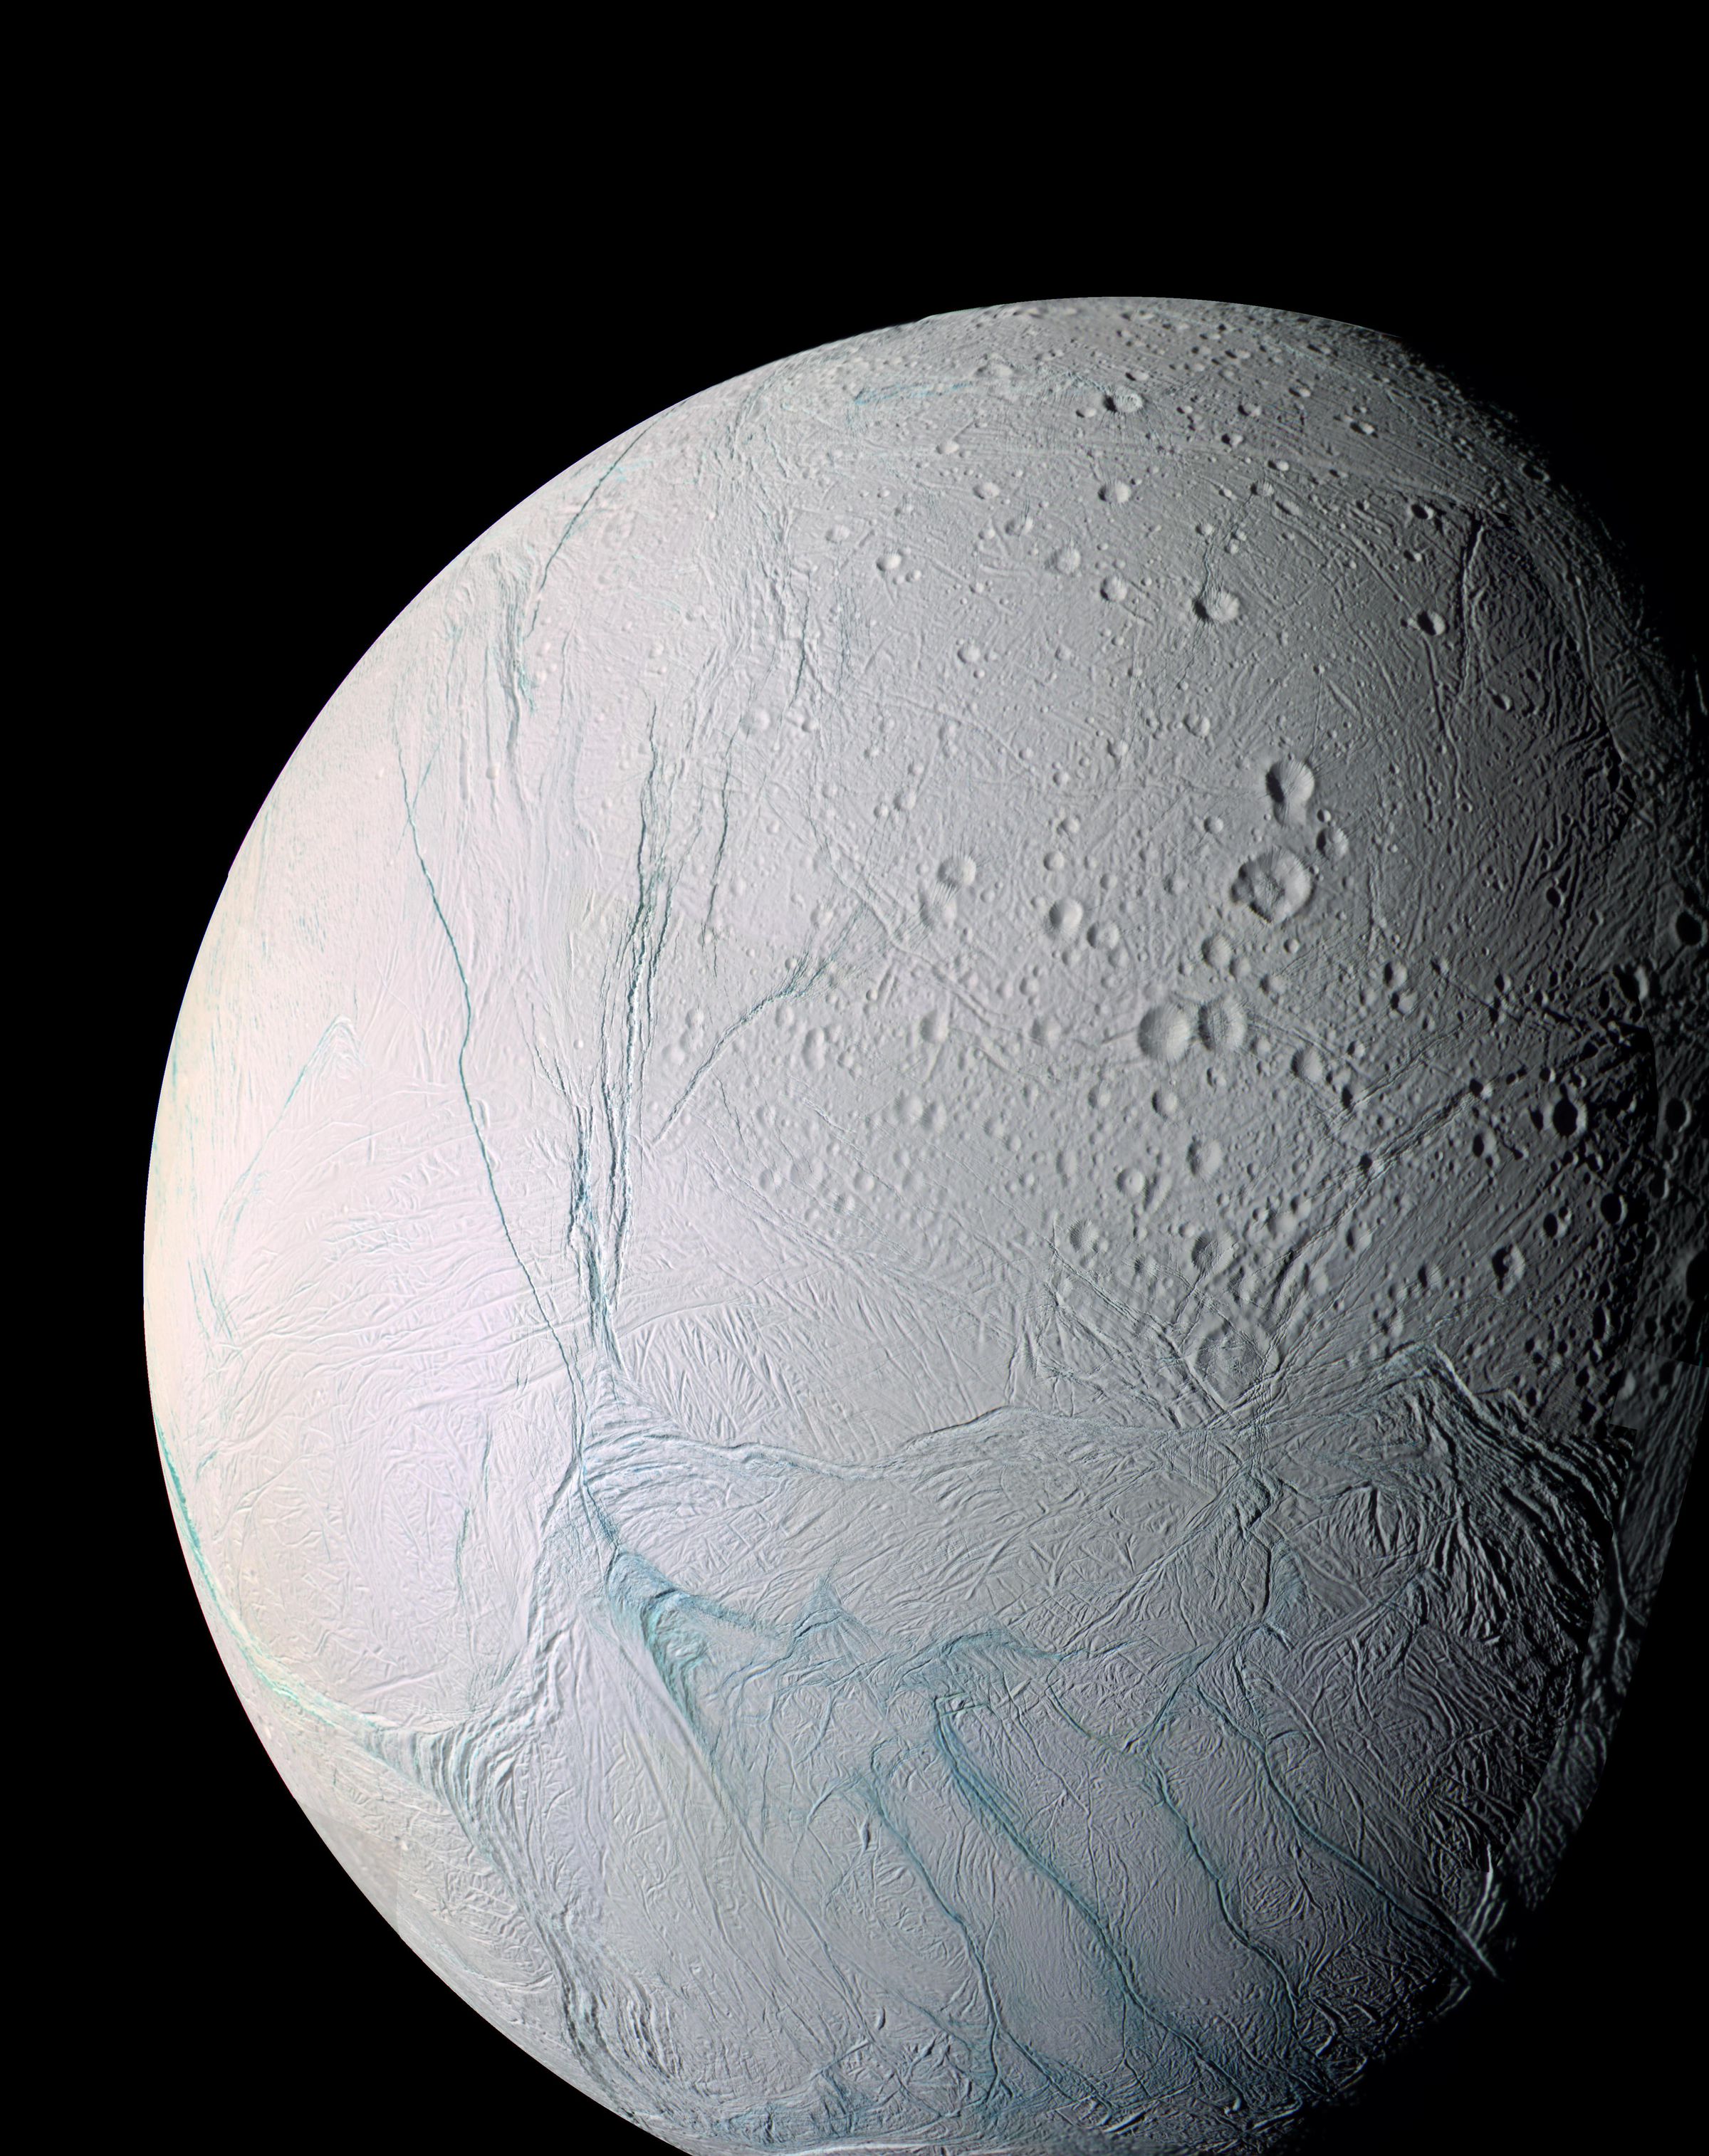 Saturn’s moon Enceladus, photographed on March 9th and July 14th, 2005. 